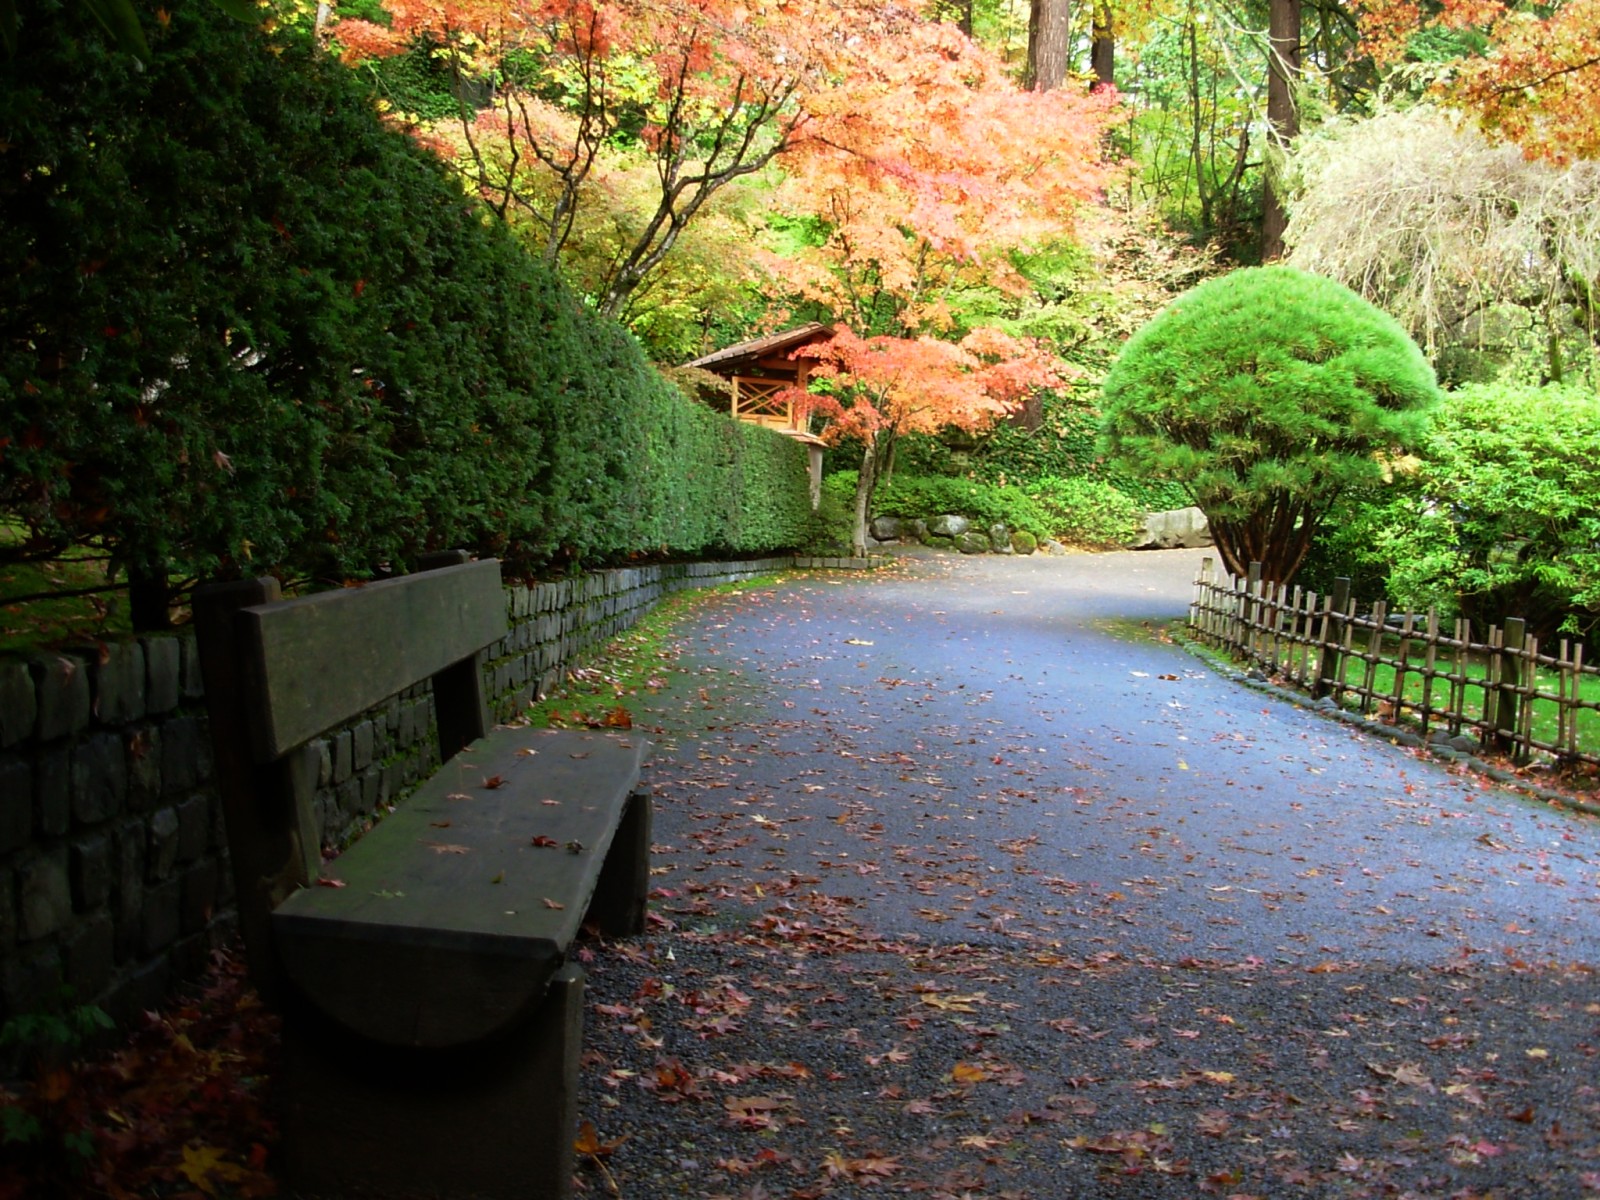 A serene path leading to a tree beside a bench.